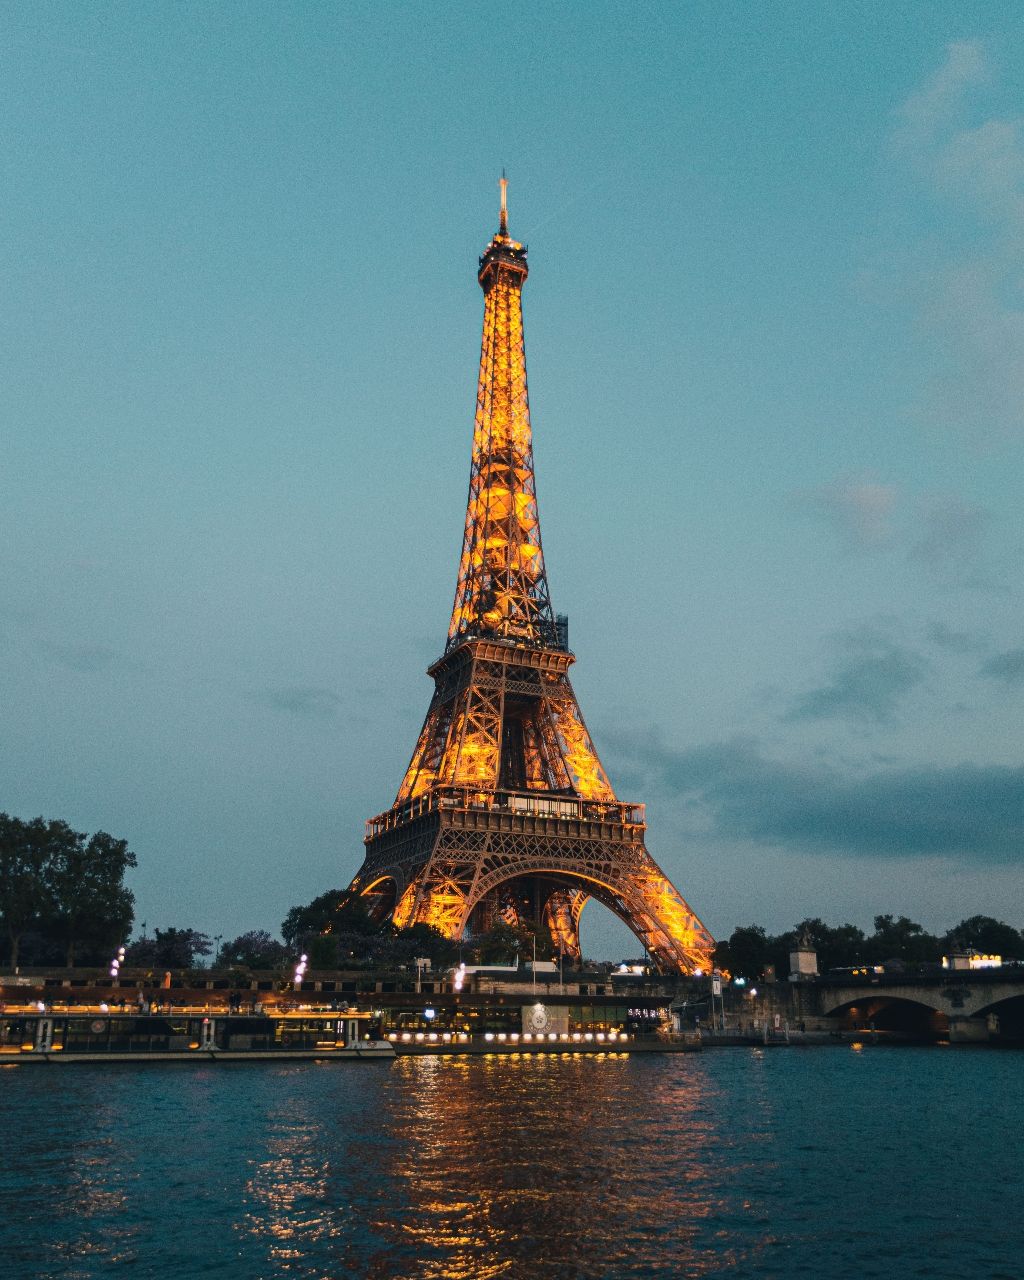 Eifel Tower - From River bank, France